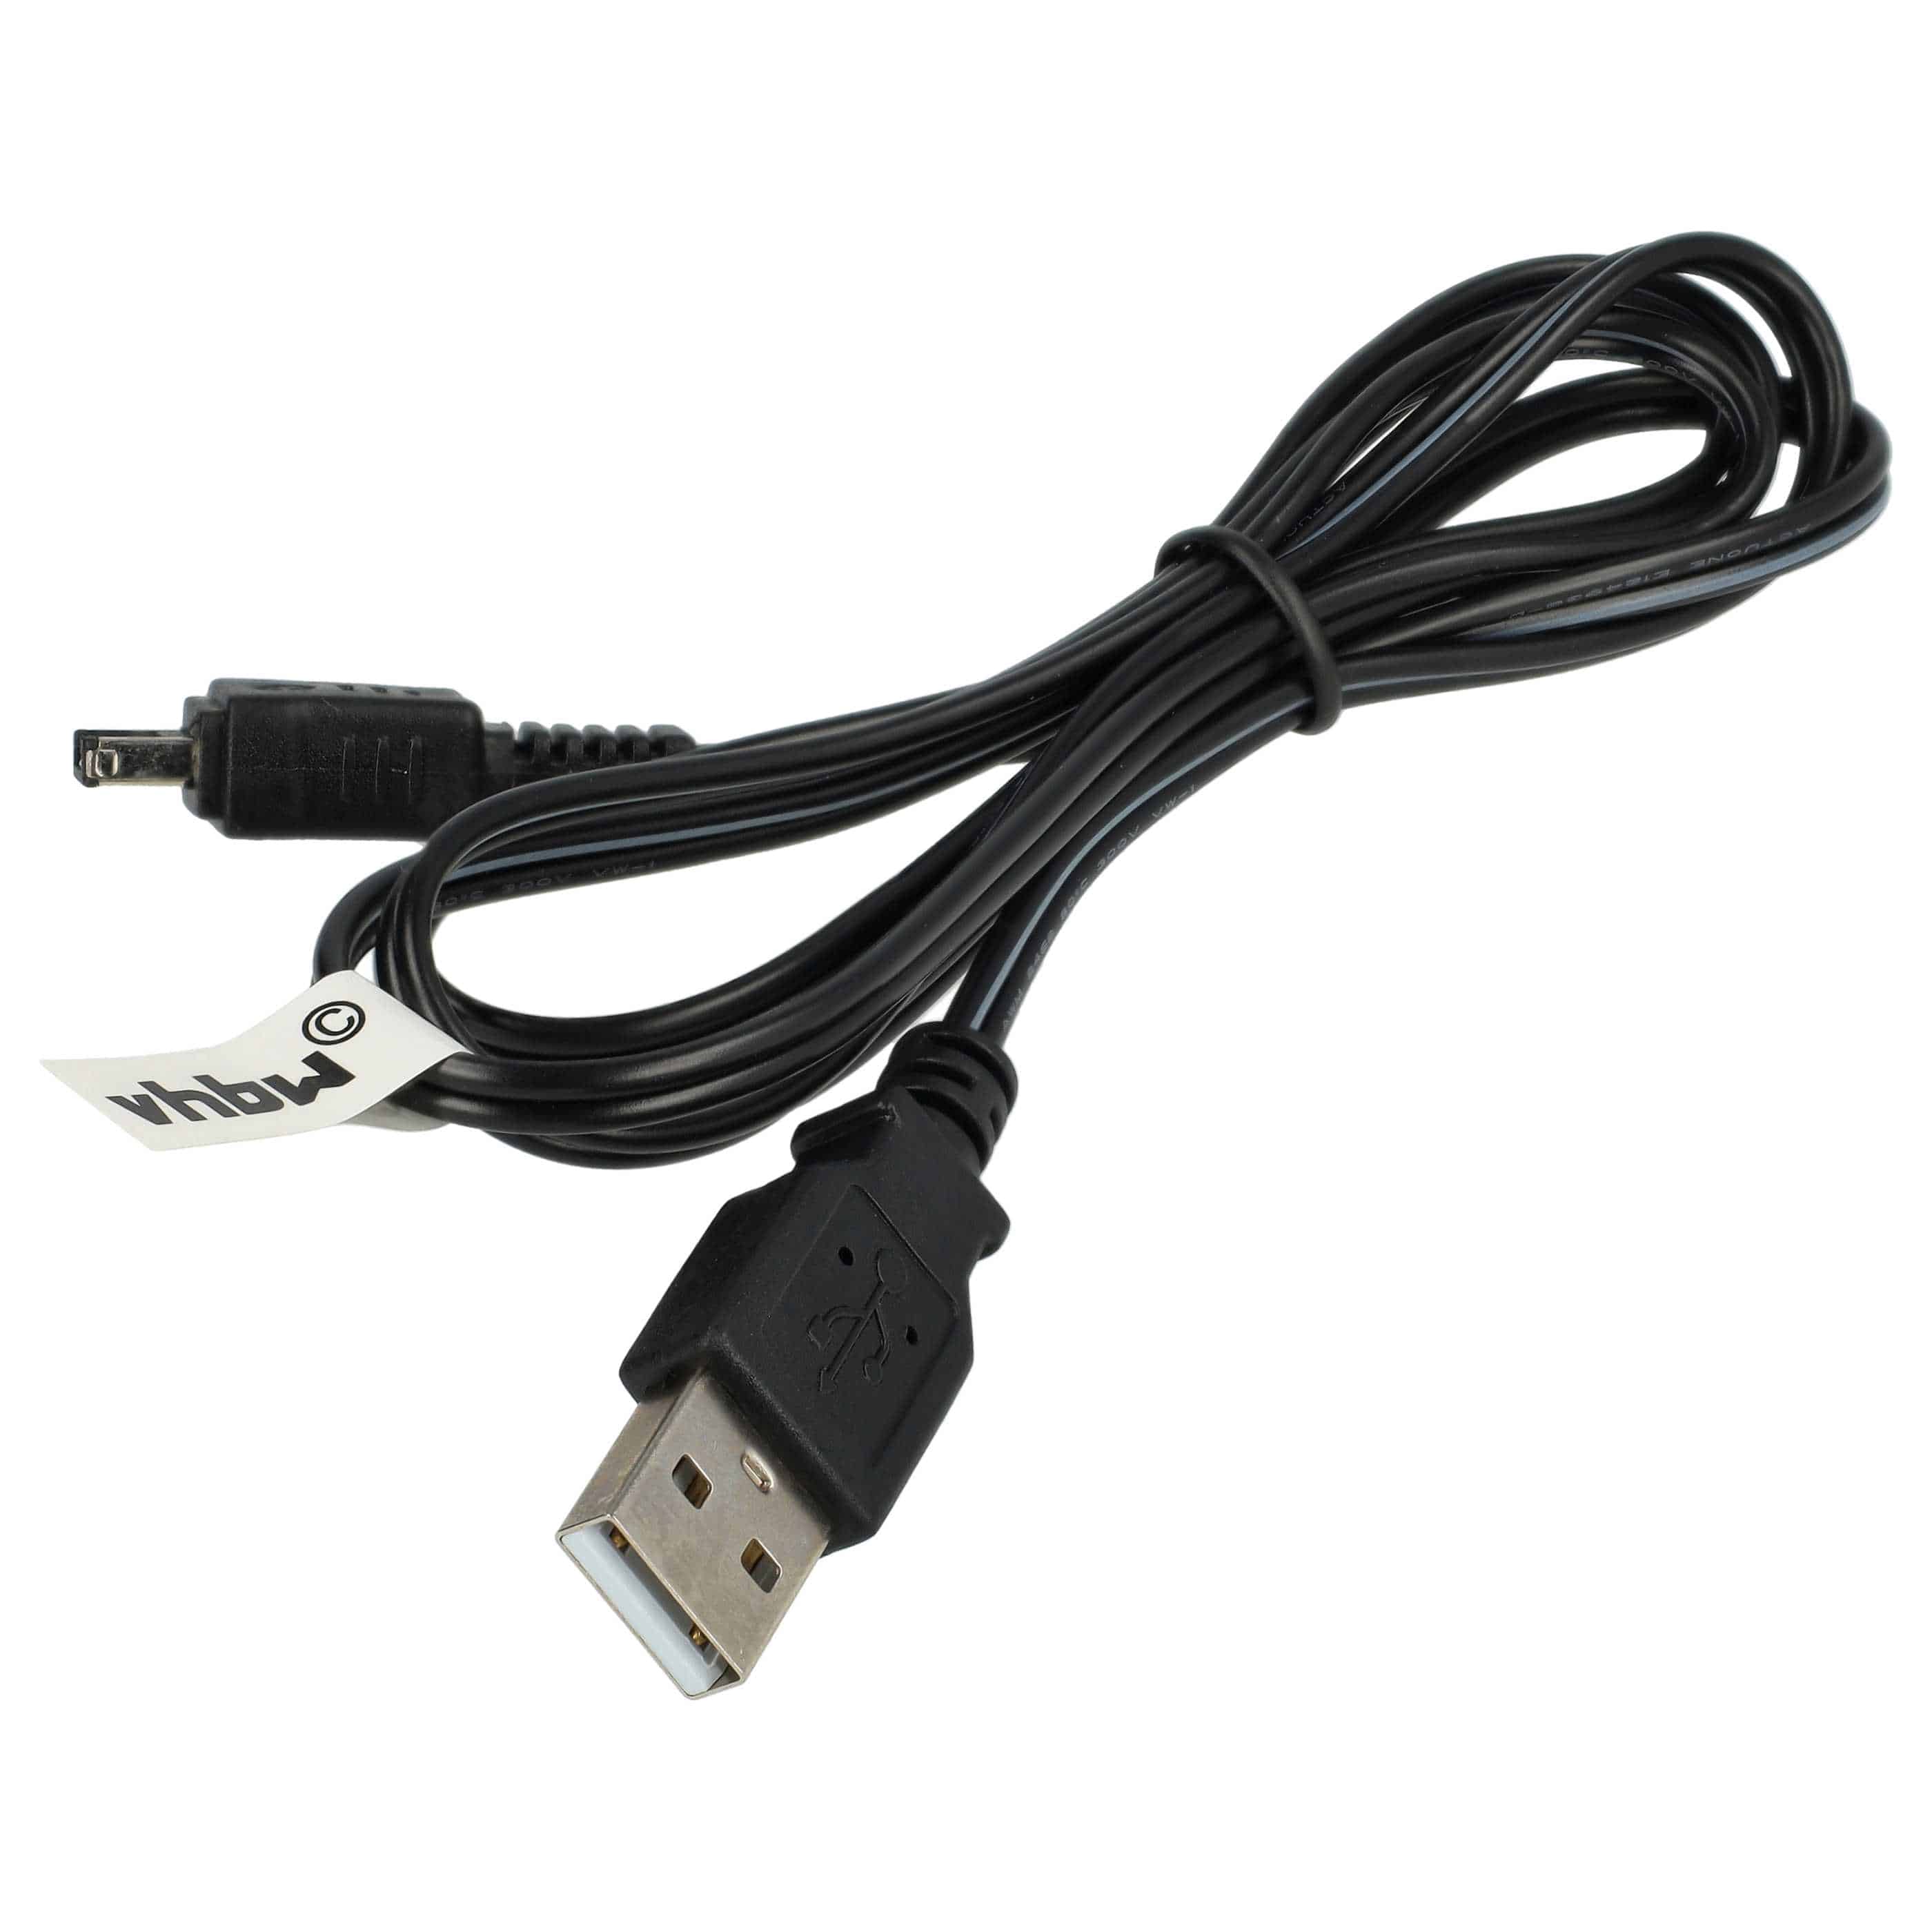 USB Data Cable suitable for Canon Legria HF M52 Camera - 120 cm